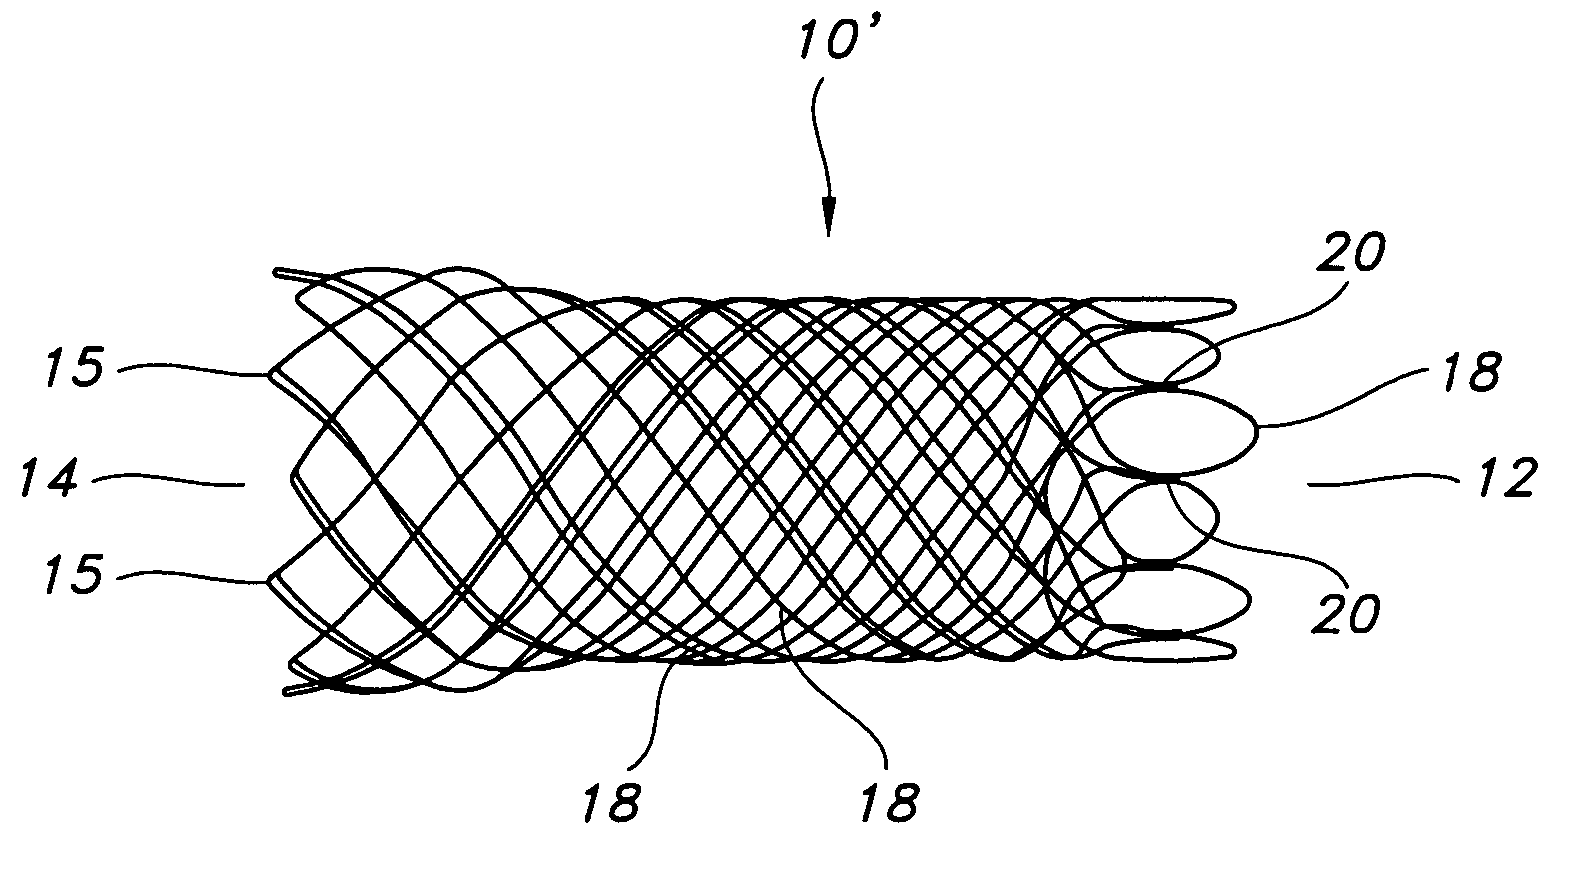 Atraumatic stent with reduced deployment force, method for making the same and method and apparatus for deploying and positioning the stent